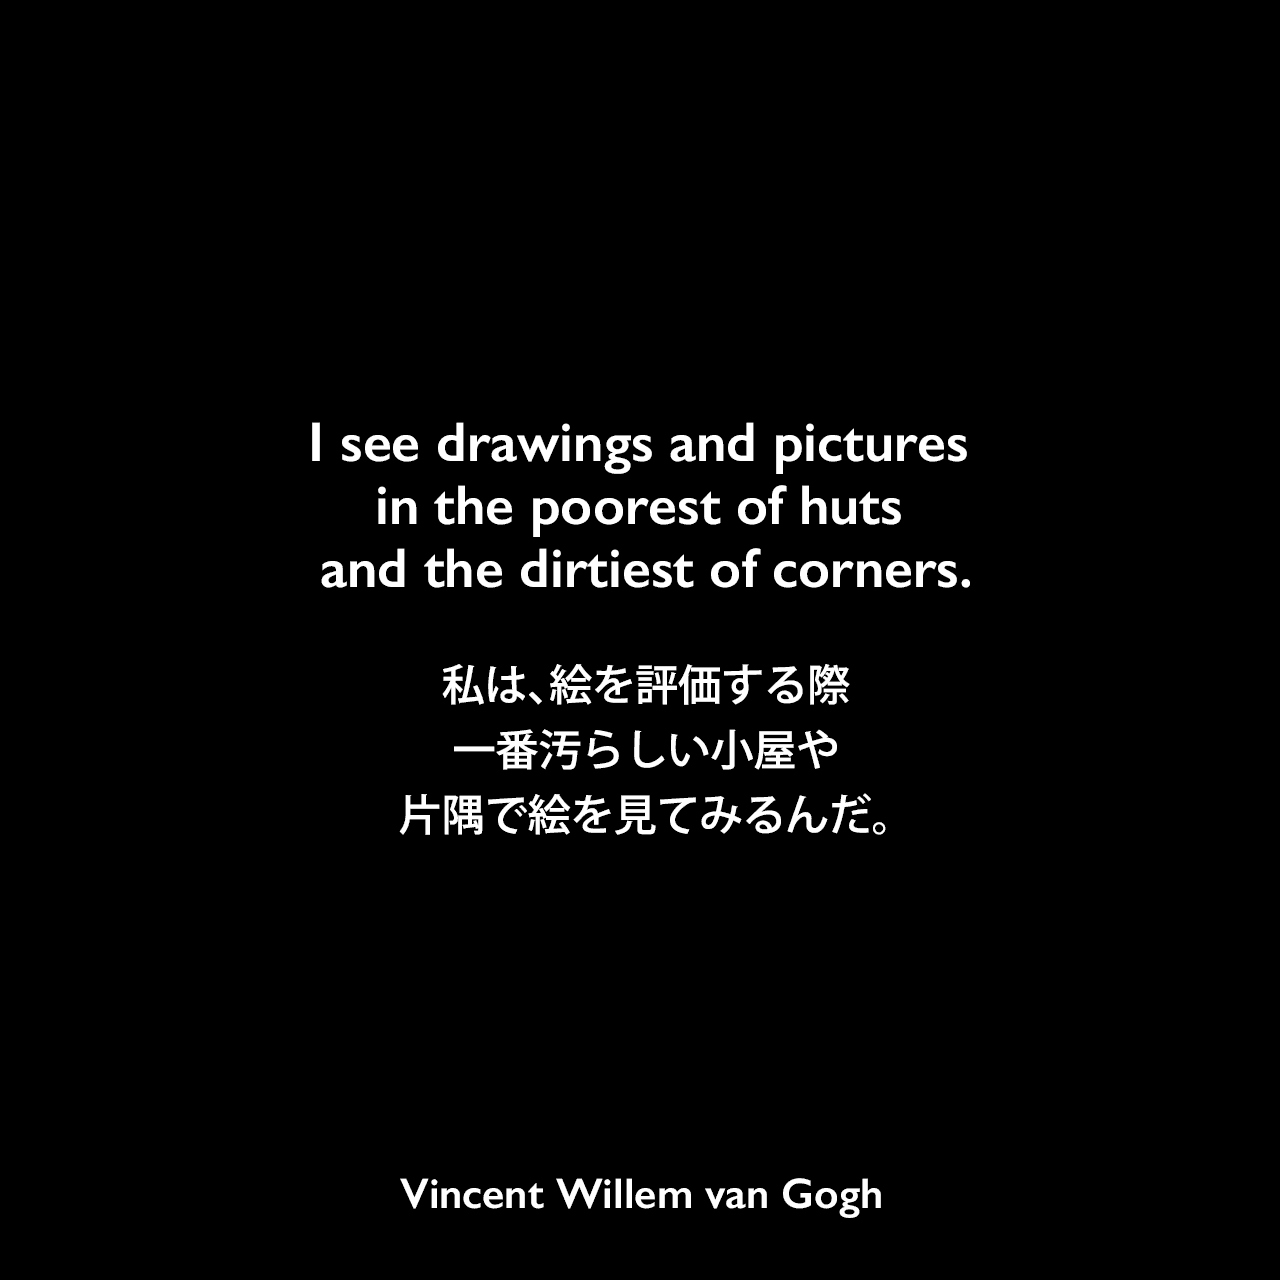 I see drawings and pictures in the poorest of huts and the dirtiest of corners.私は、絵を評価する際、一番汚らしい小屋や片隅で絵を見てみるんだ。Vincent Willem van Gogh